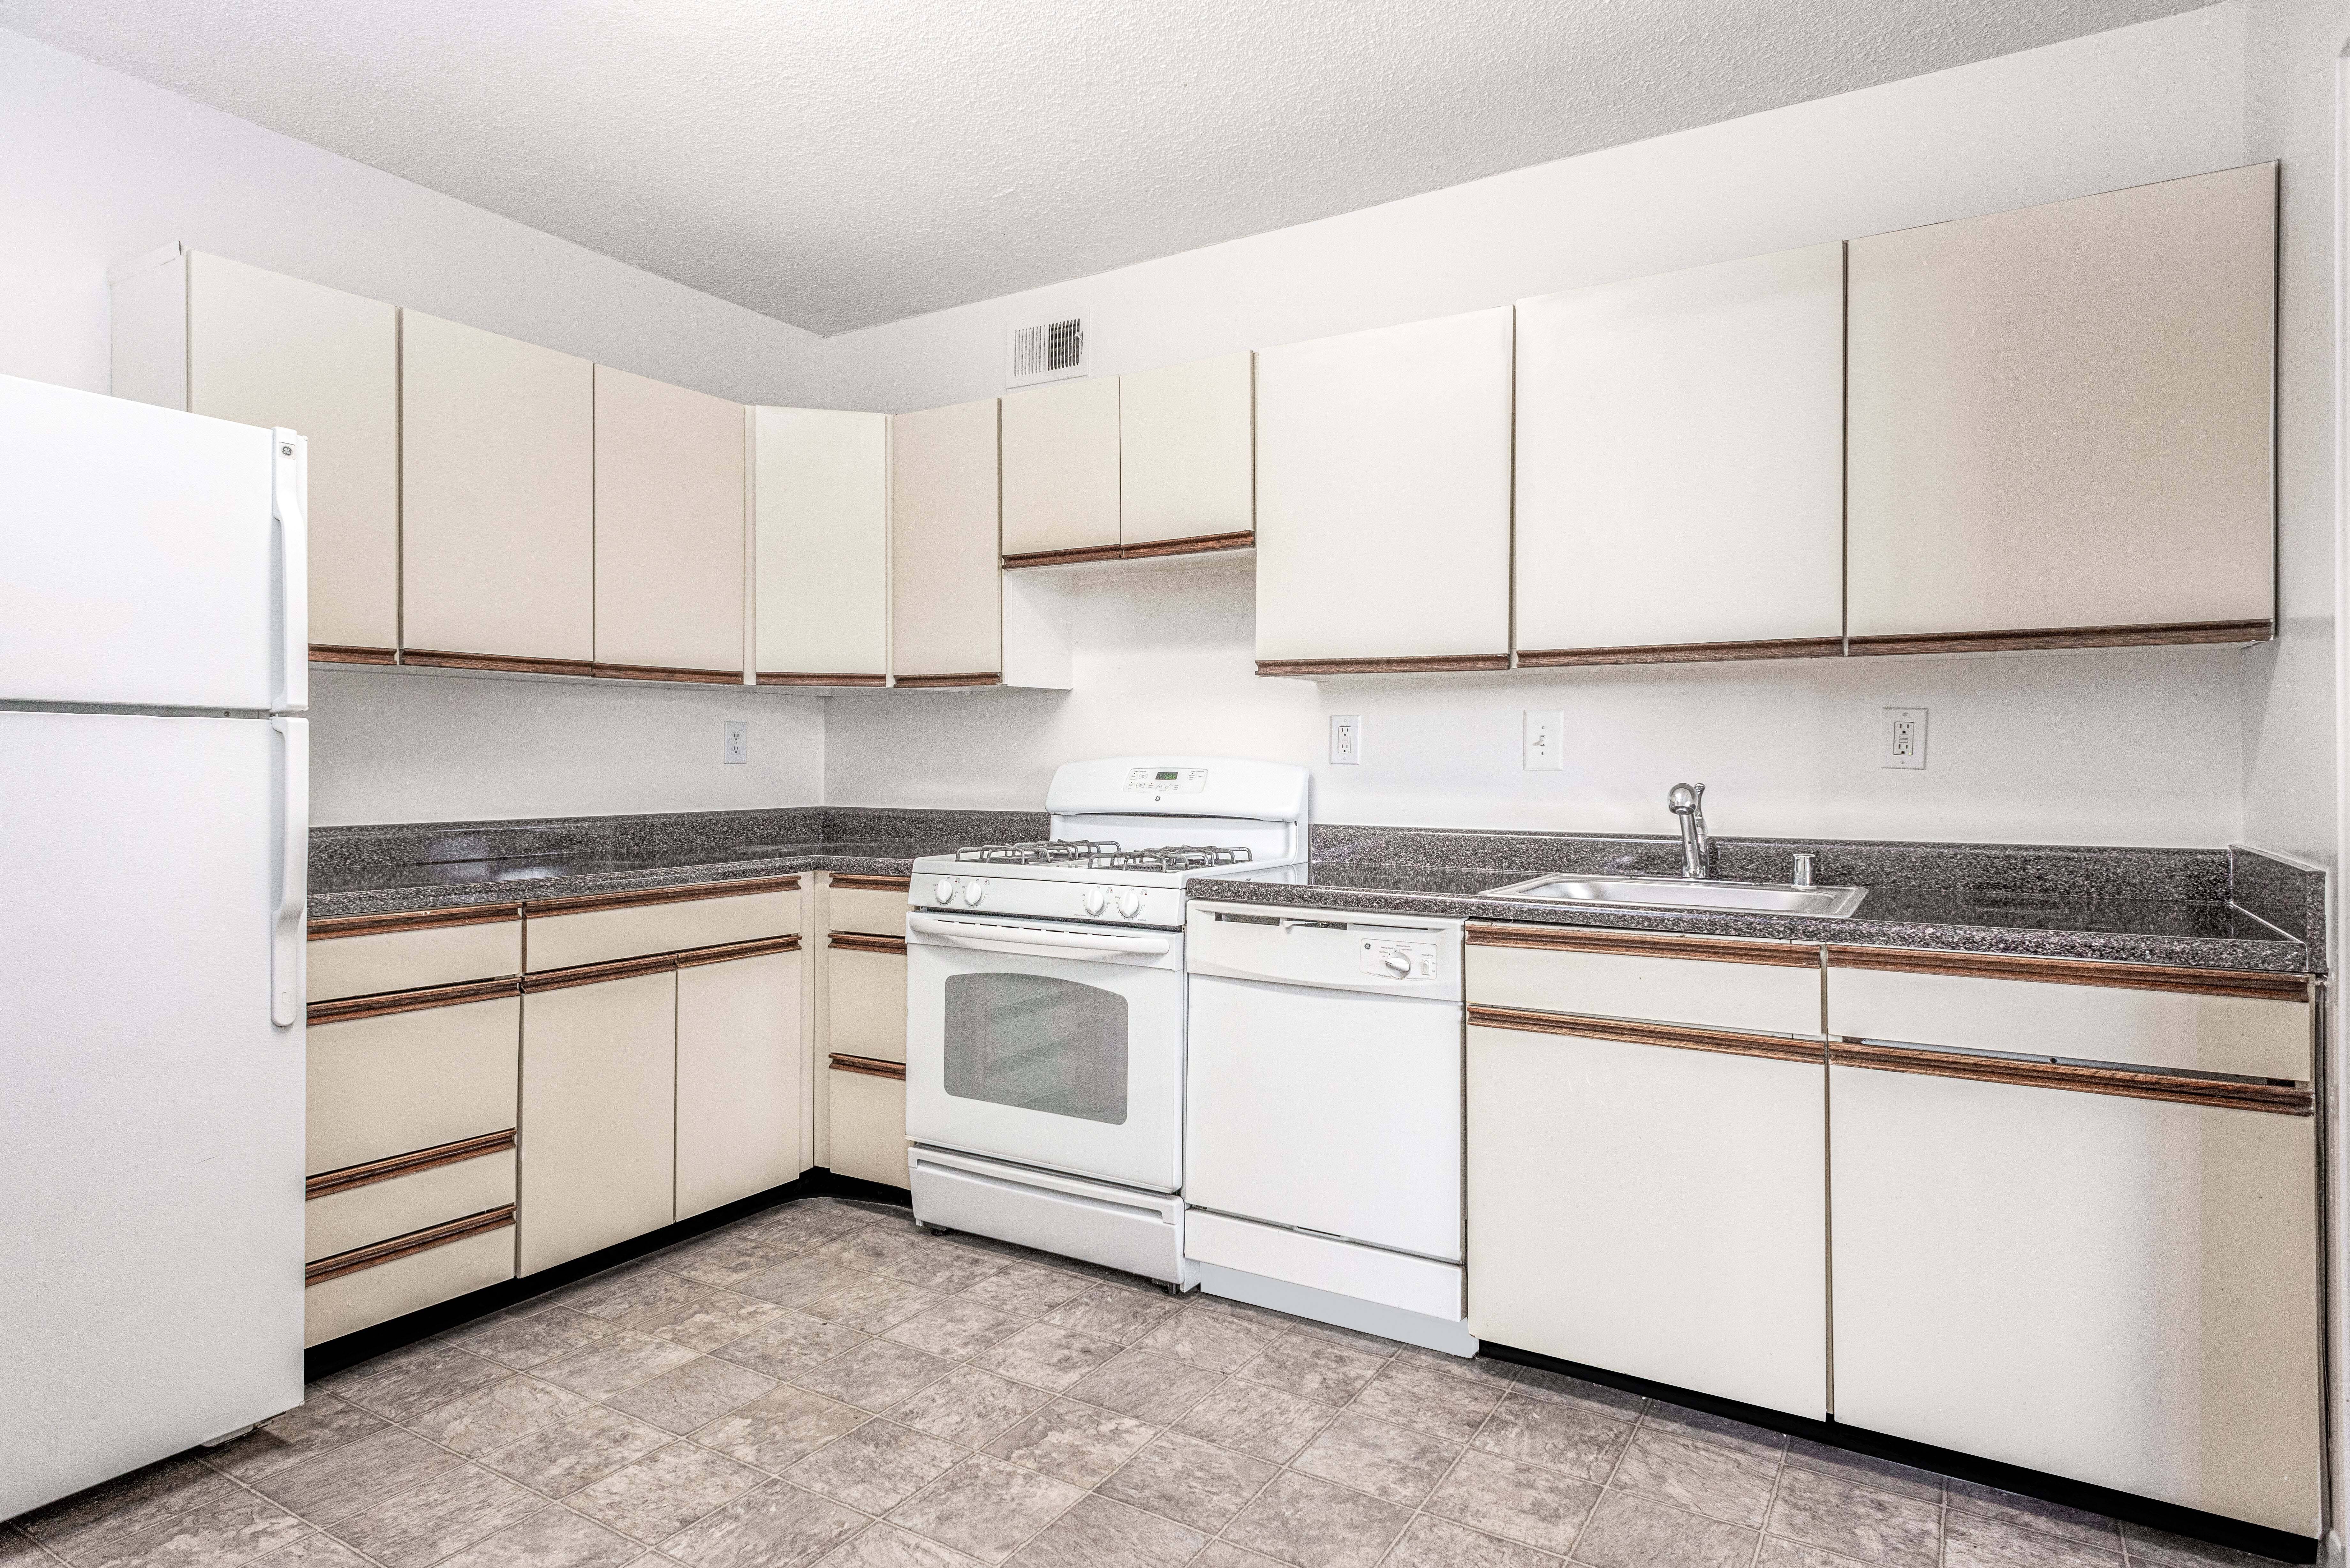 Update kitchen counters with ample storage space and gas range